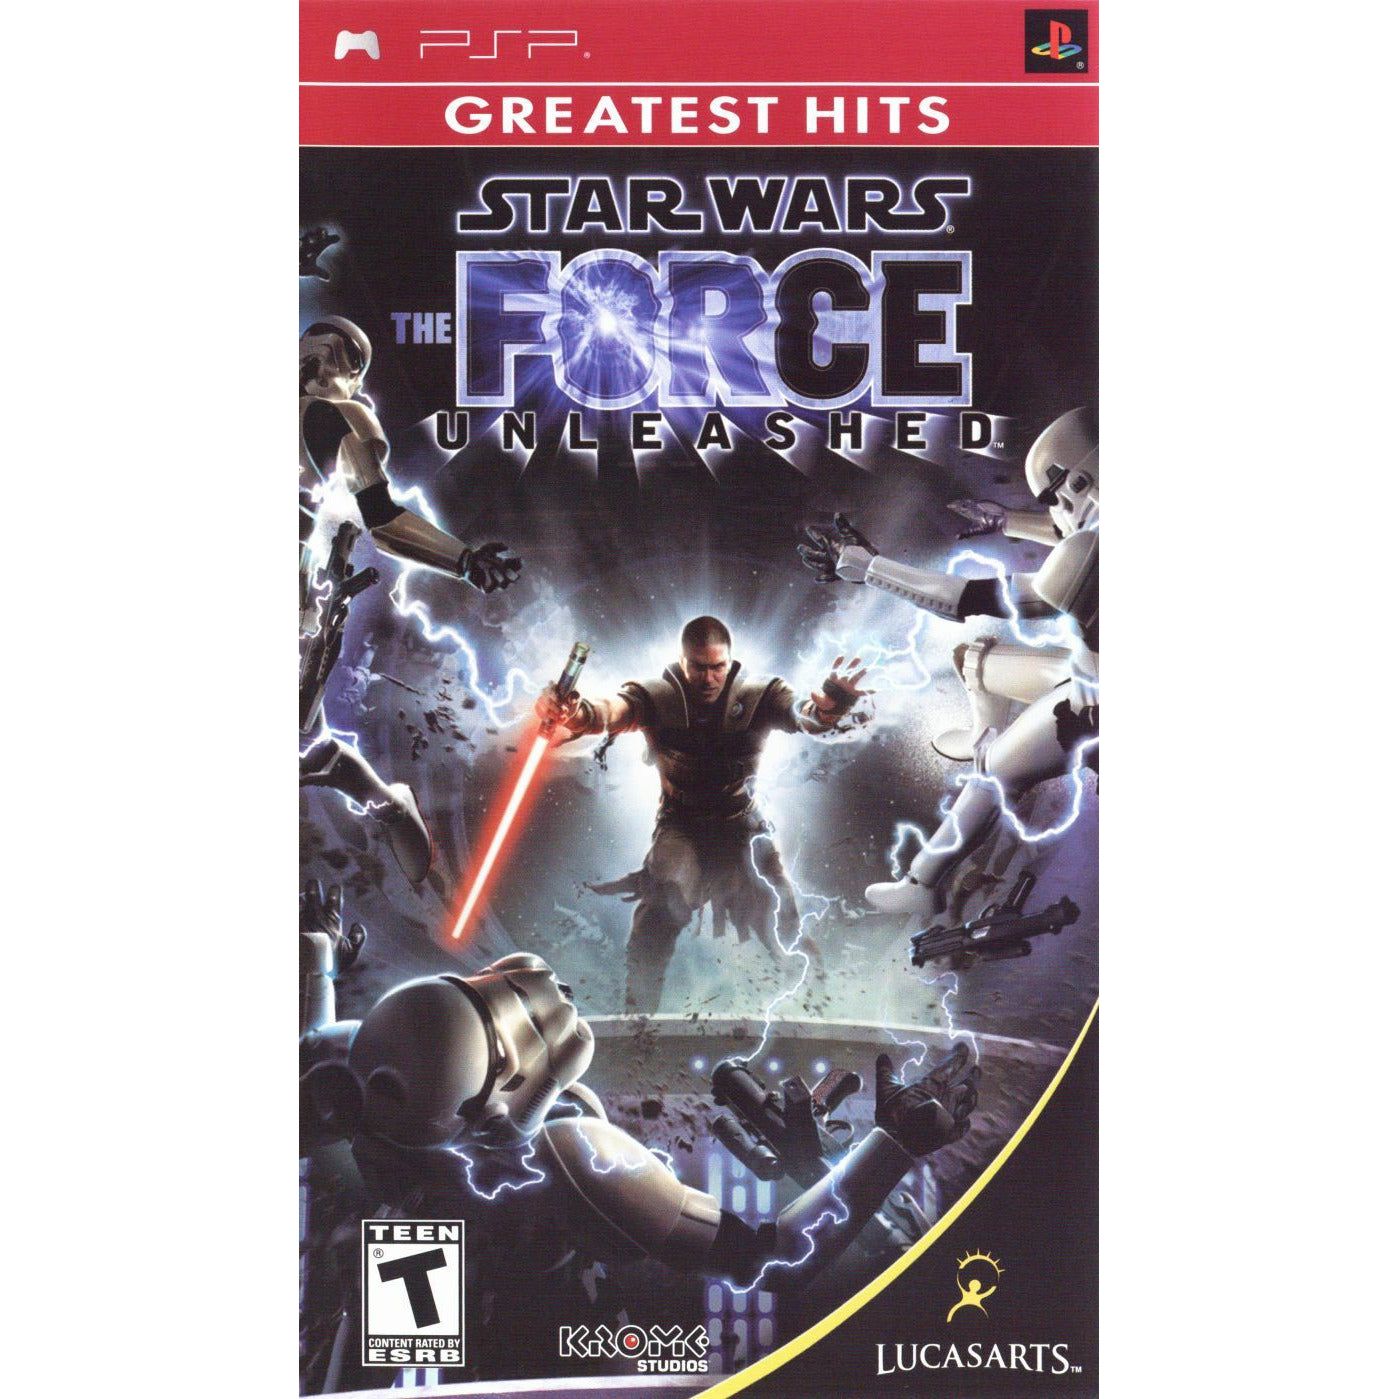 PSP - Star Wars The Force Unleashed (In Case)